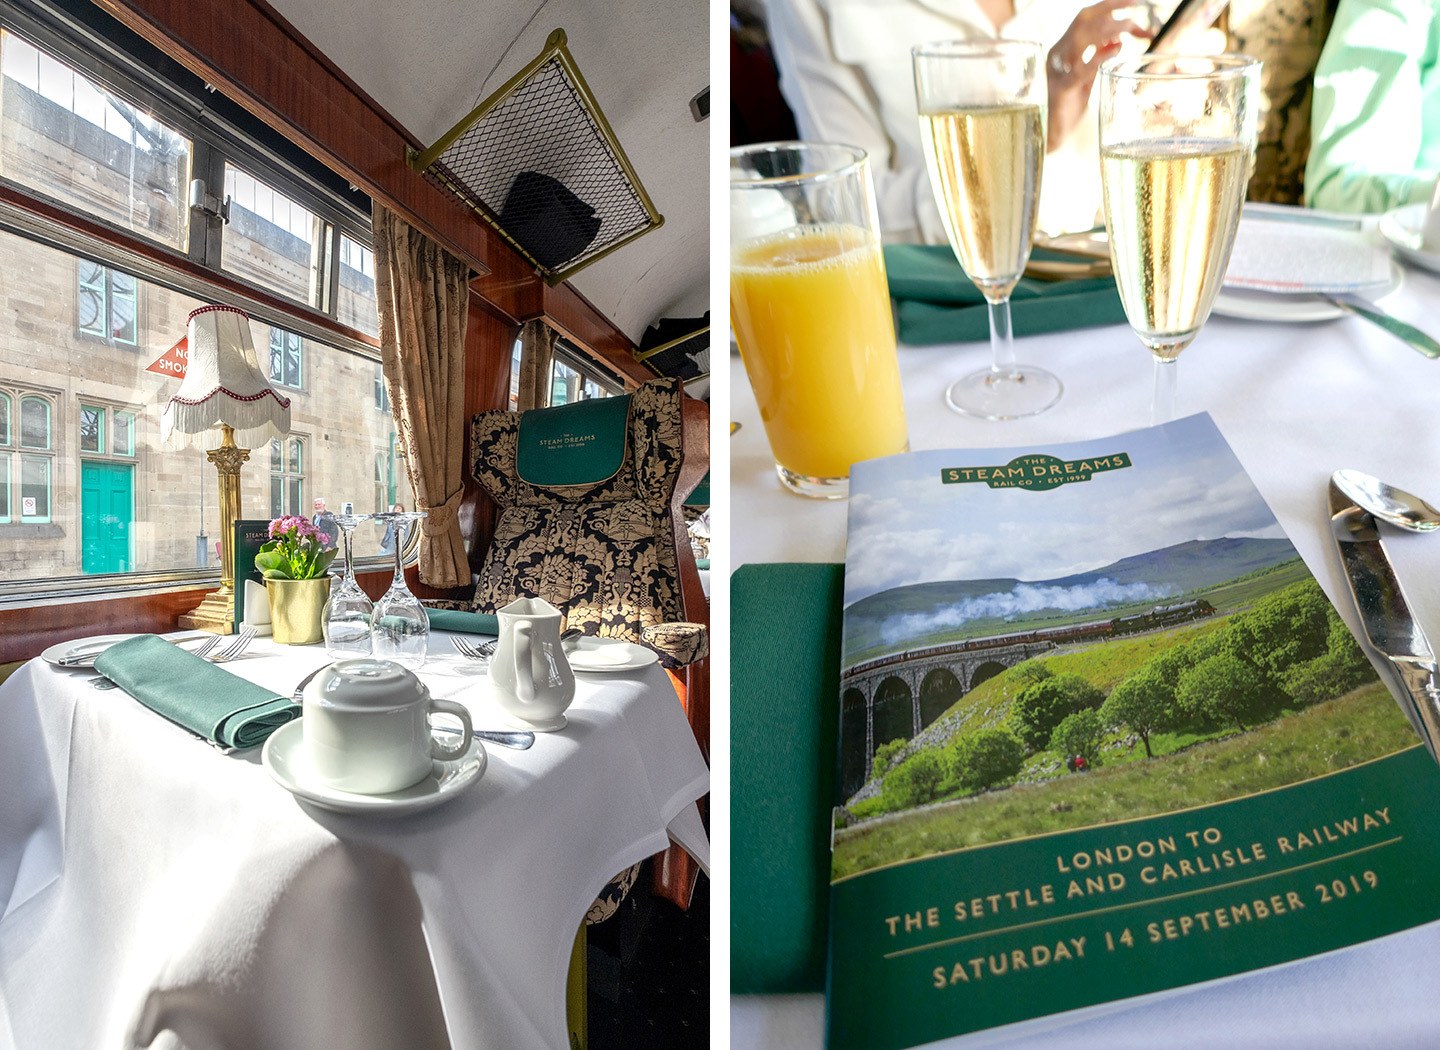 On board a steam train day trip Pullman Dining carriage